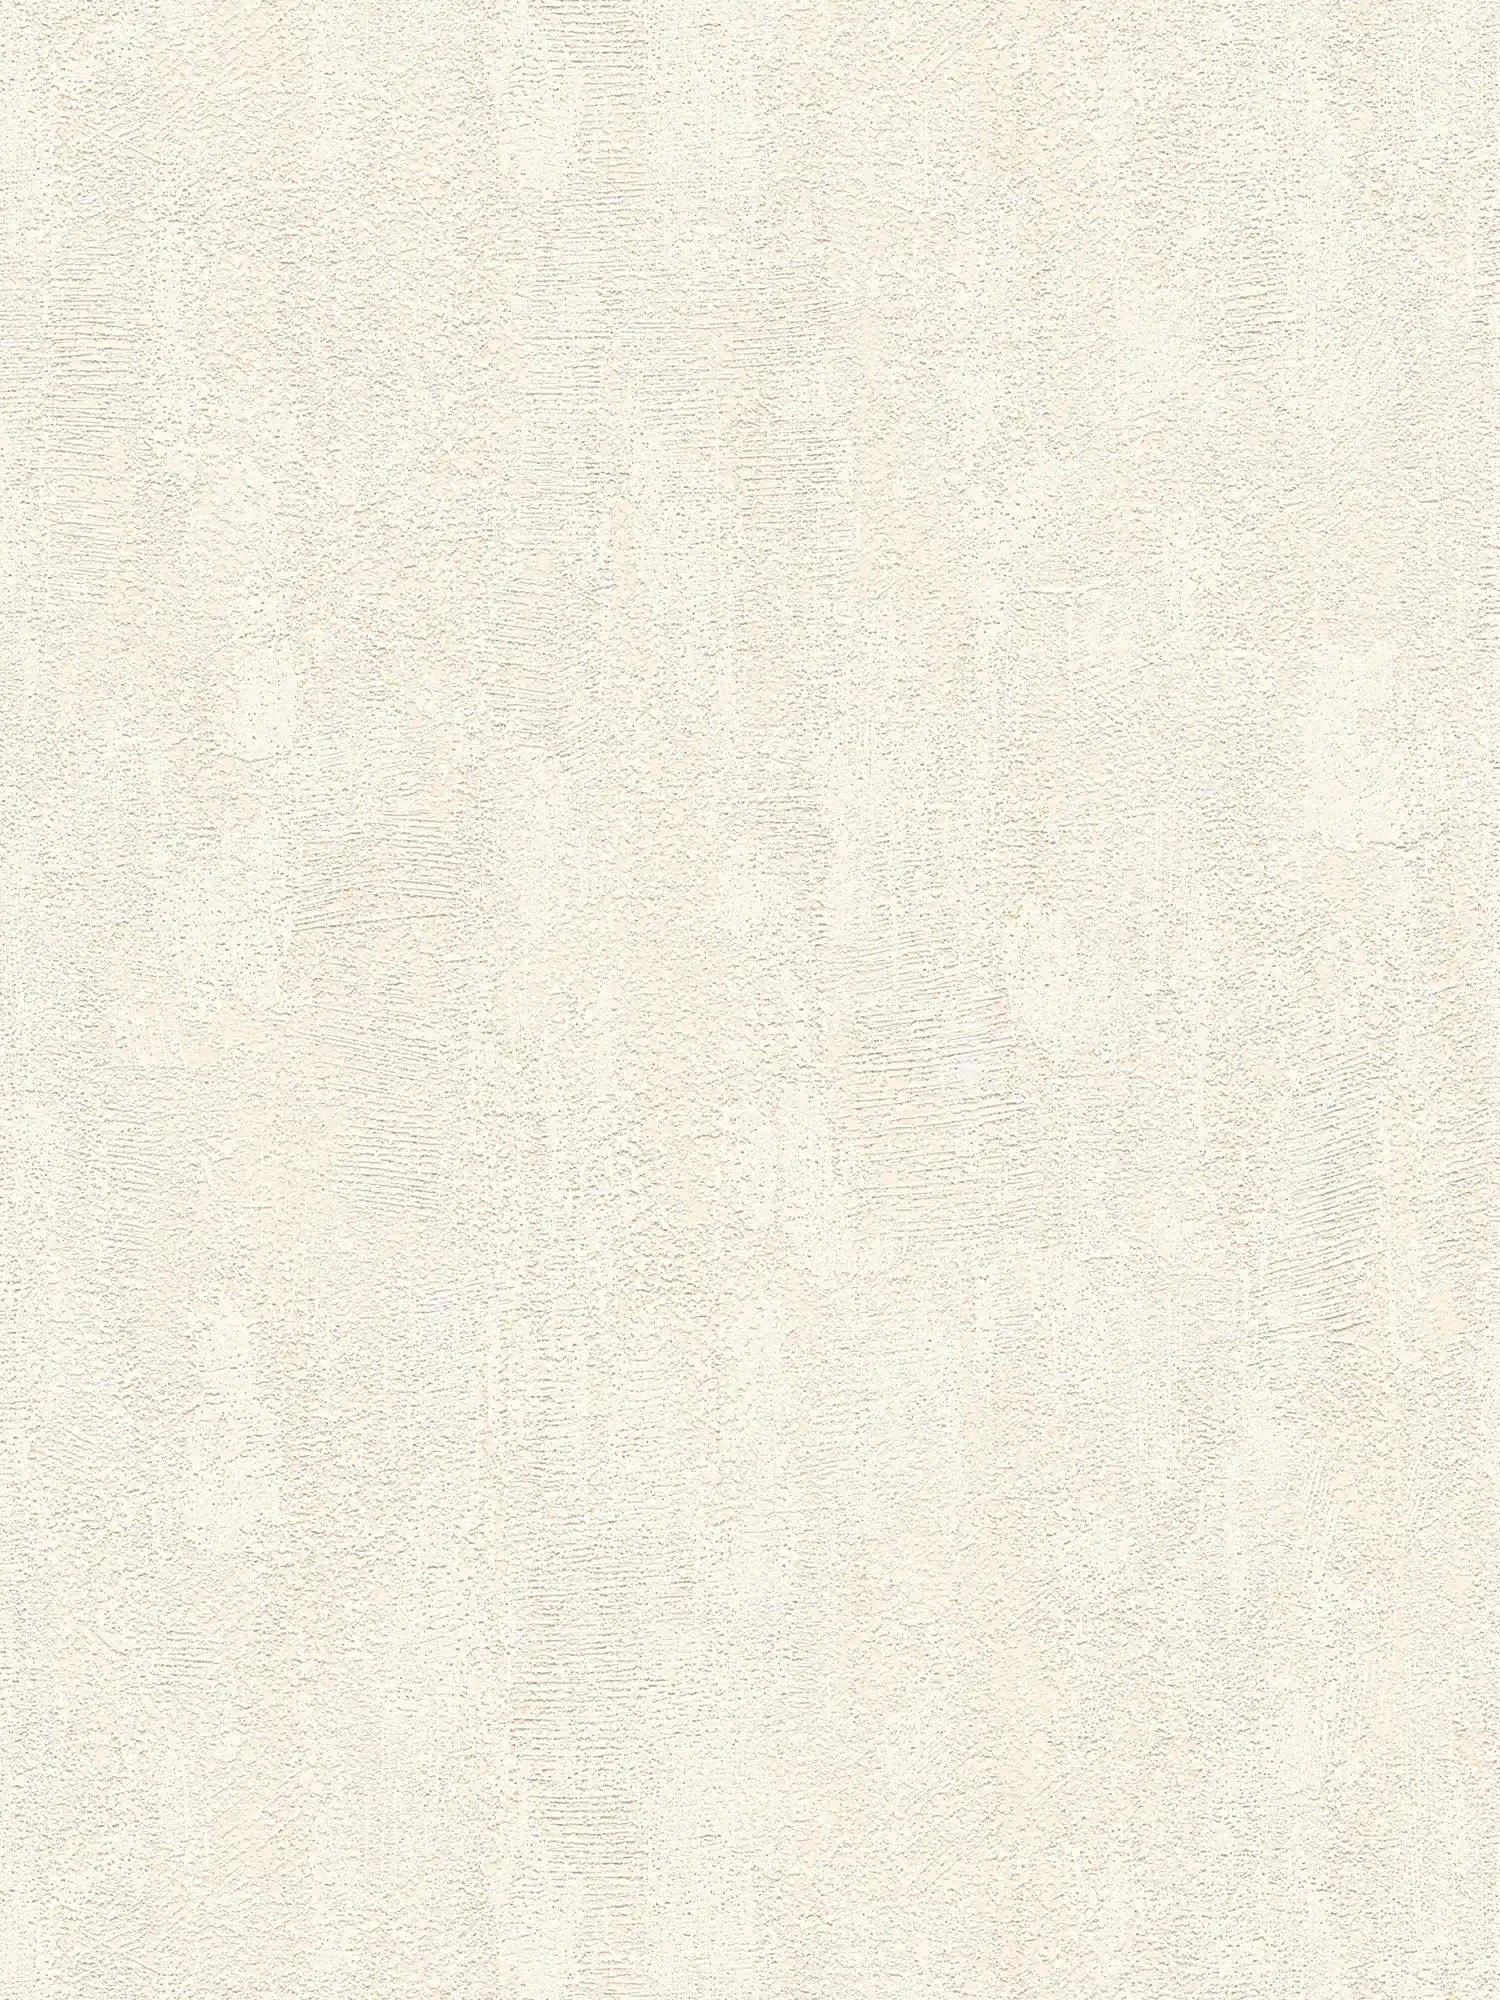 Wallpaper with textured pattern in rough plaster look - beige
